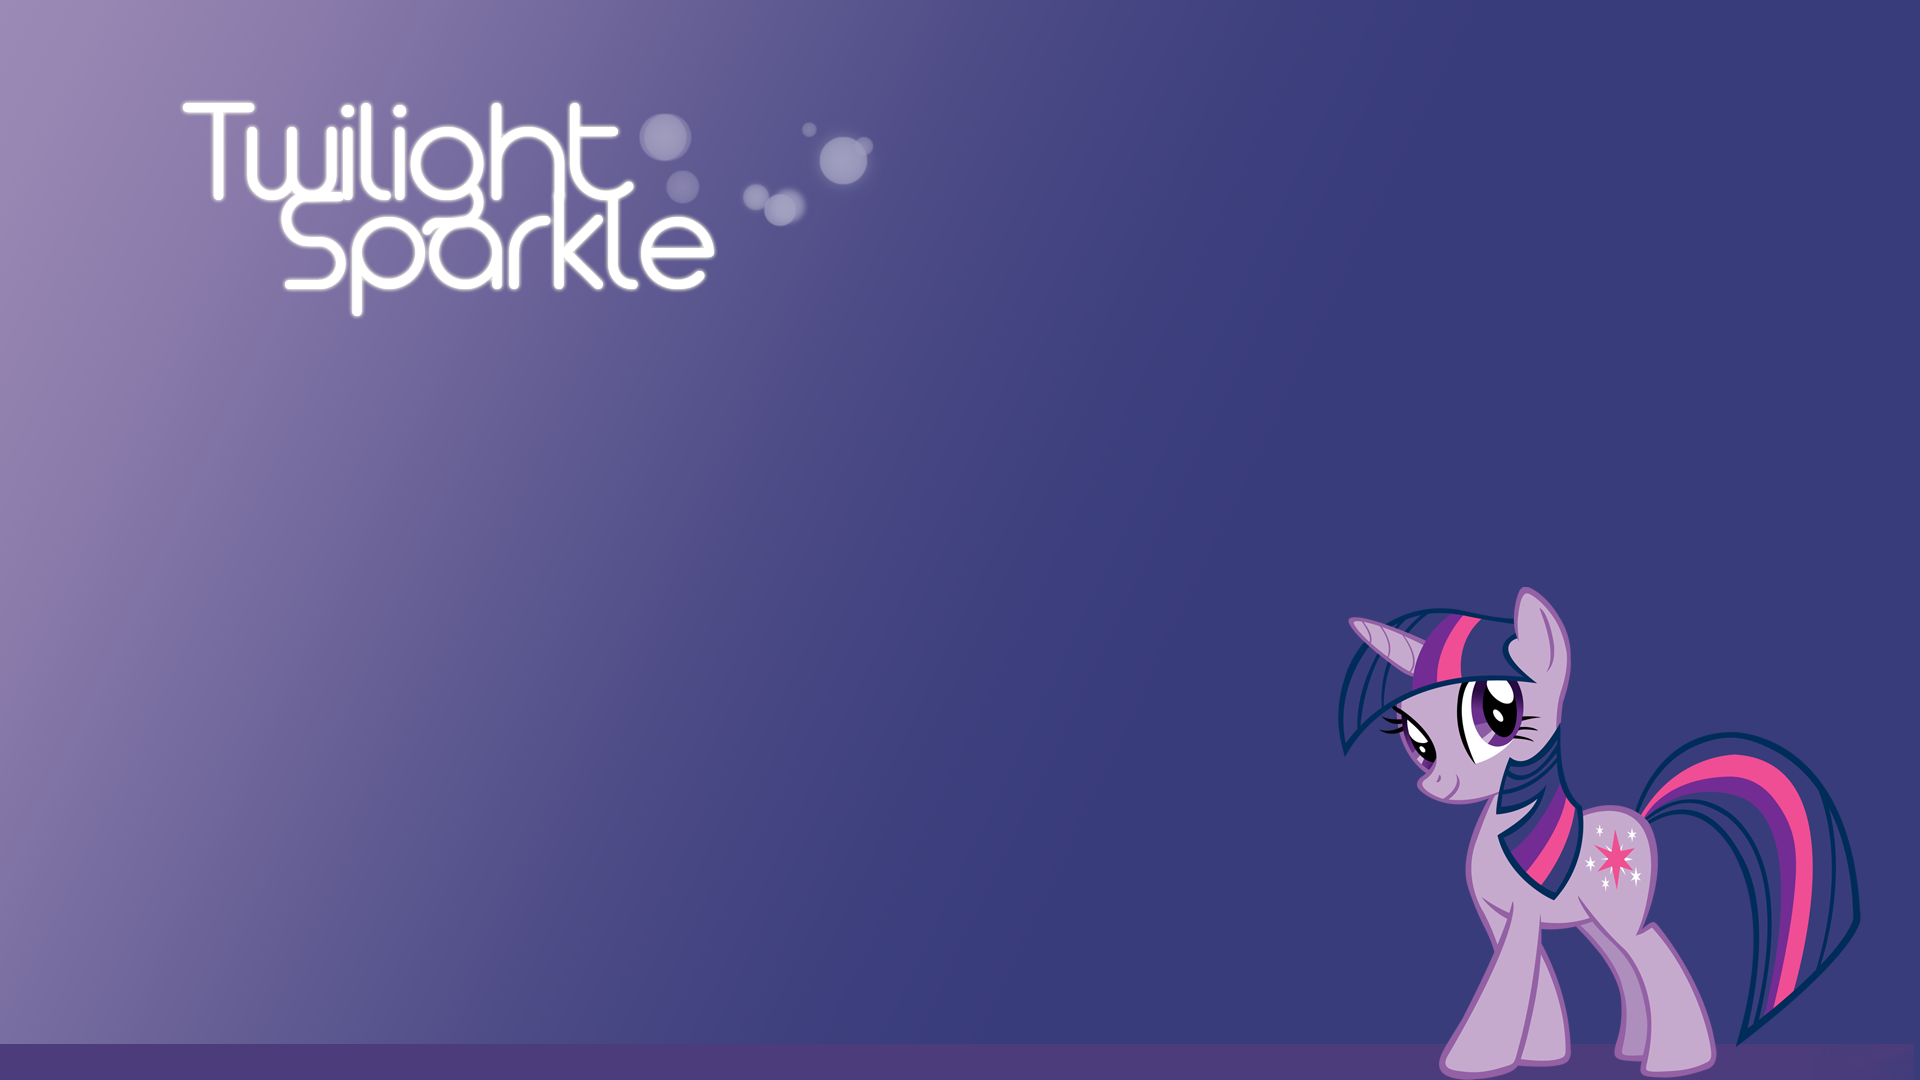 Twilight Sparkle Wallpaper by Durpy and SoundmOtion